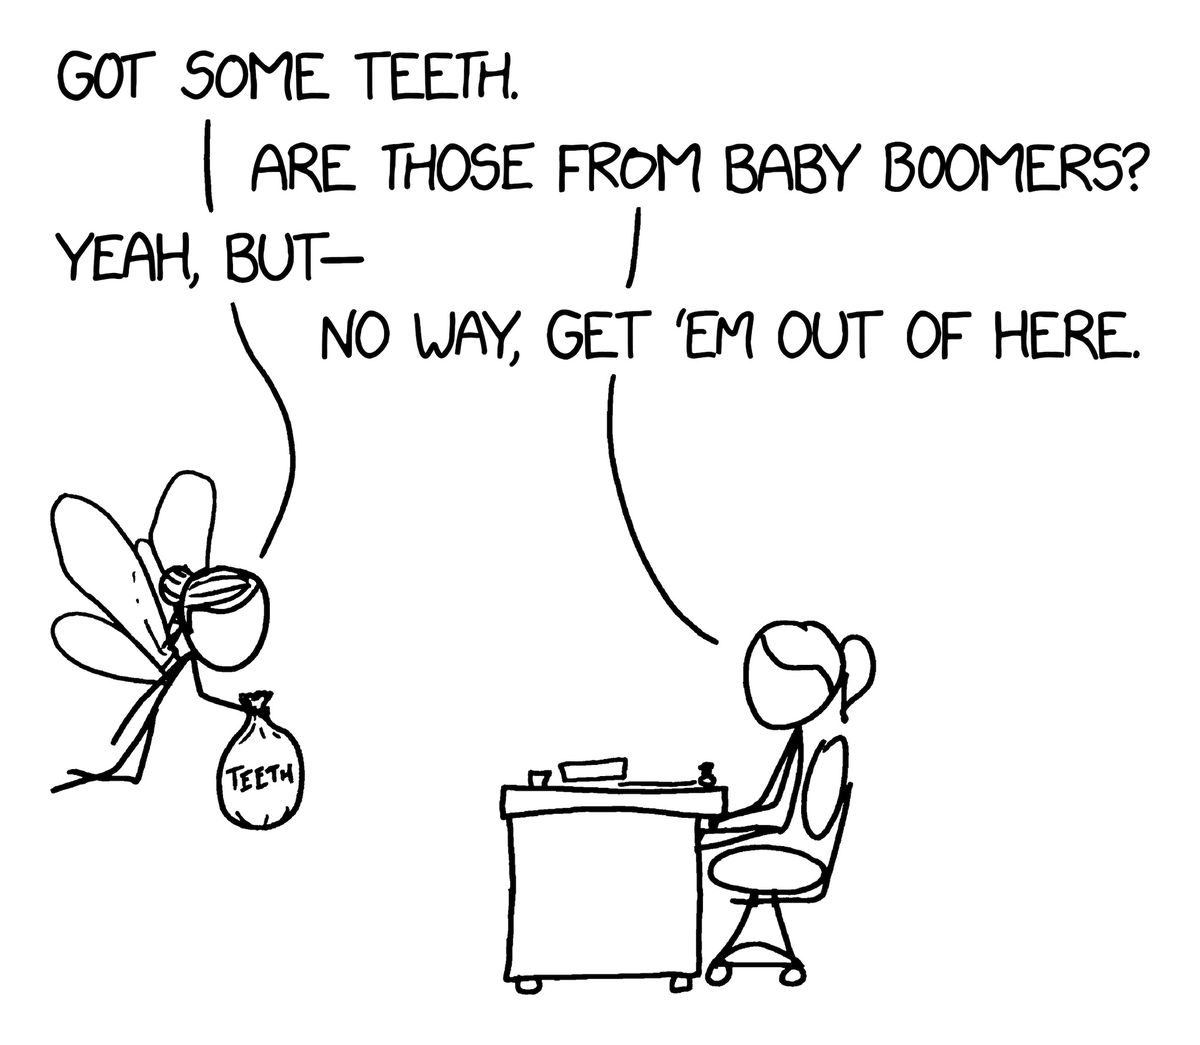 A stick figure drawing of a tooth fairy approaching a person at a desk, from the book How To. The person refuses the fairy’s teeth, because they are from Baby Boomers.